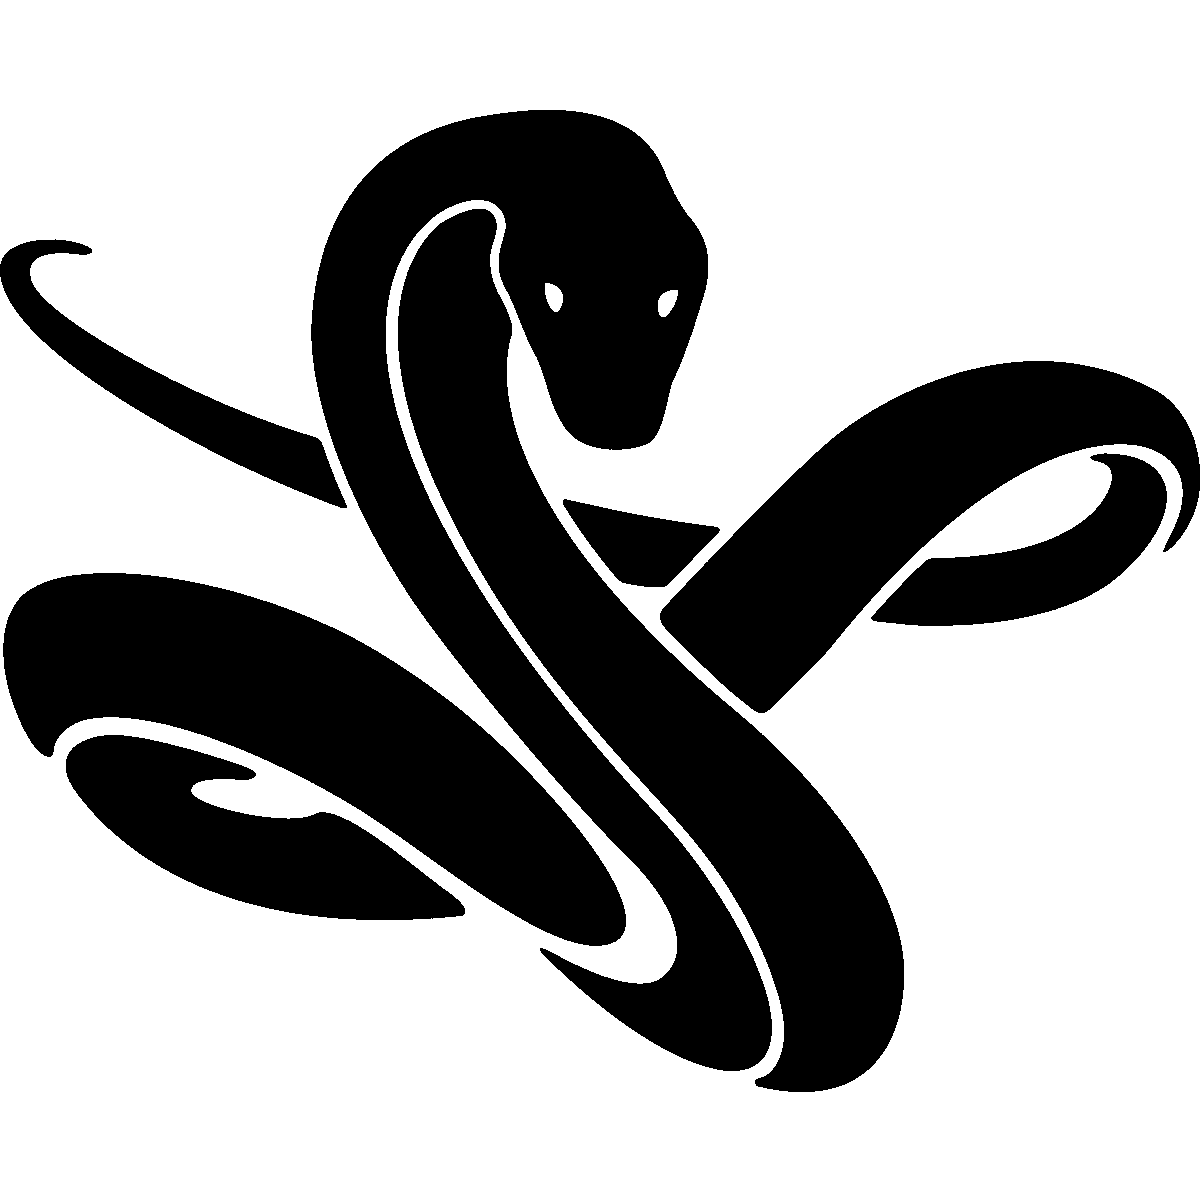 Cobra clipart silhouette. Snake jungle free icons